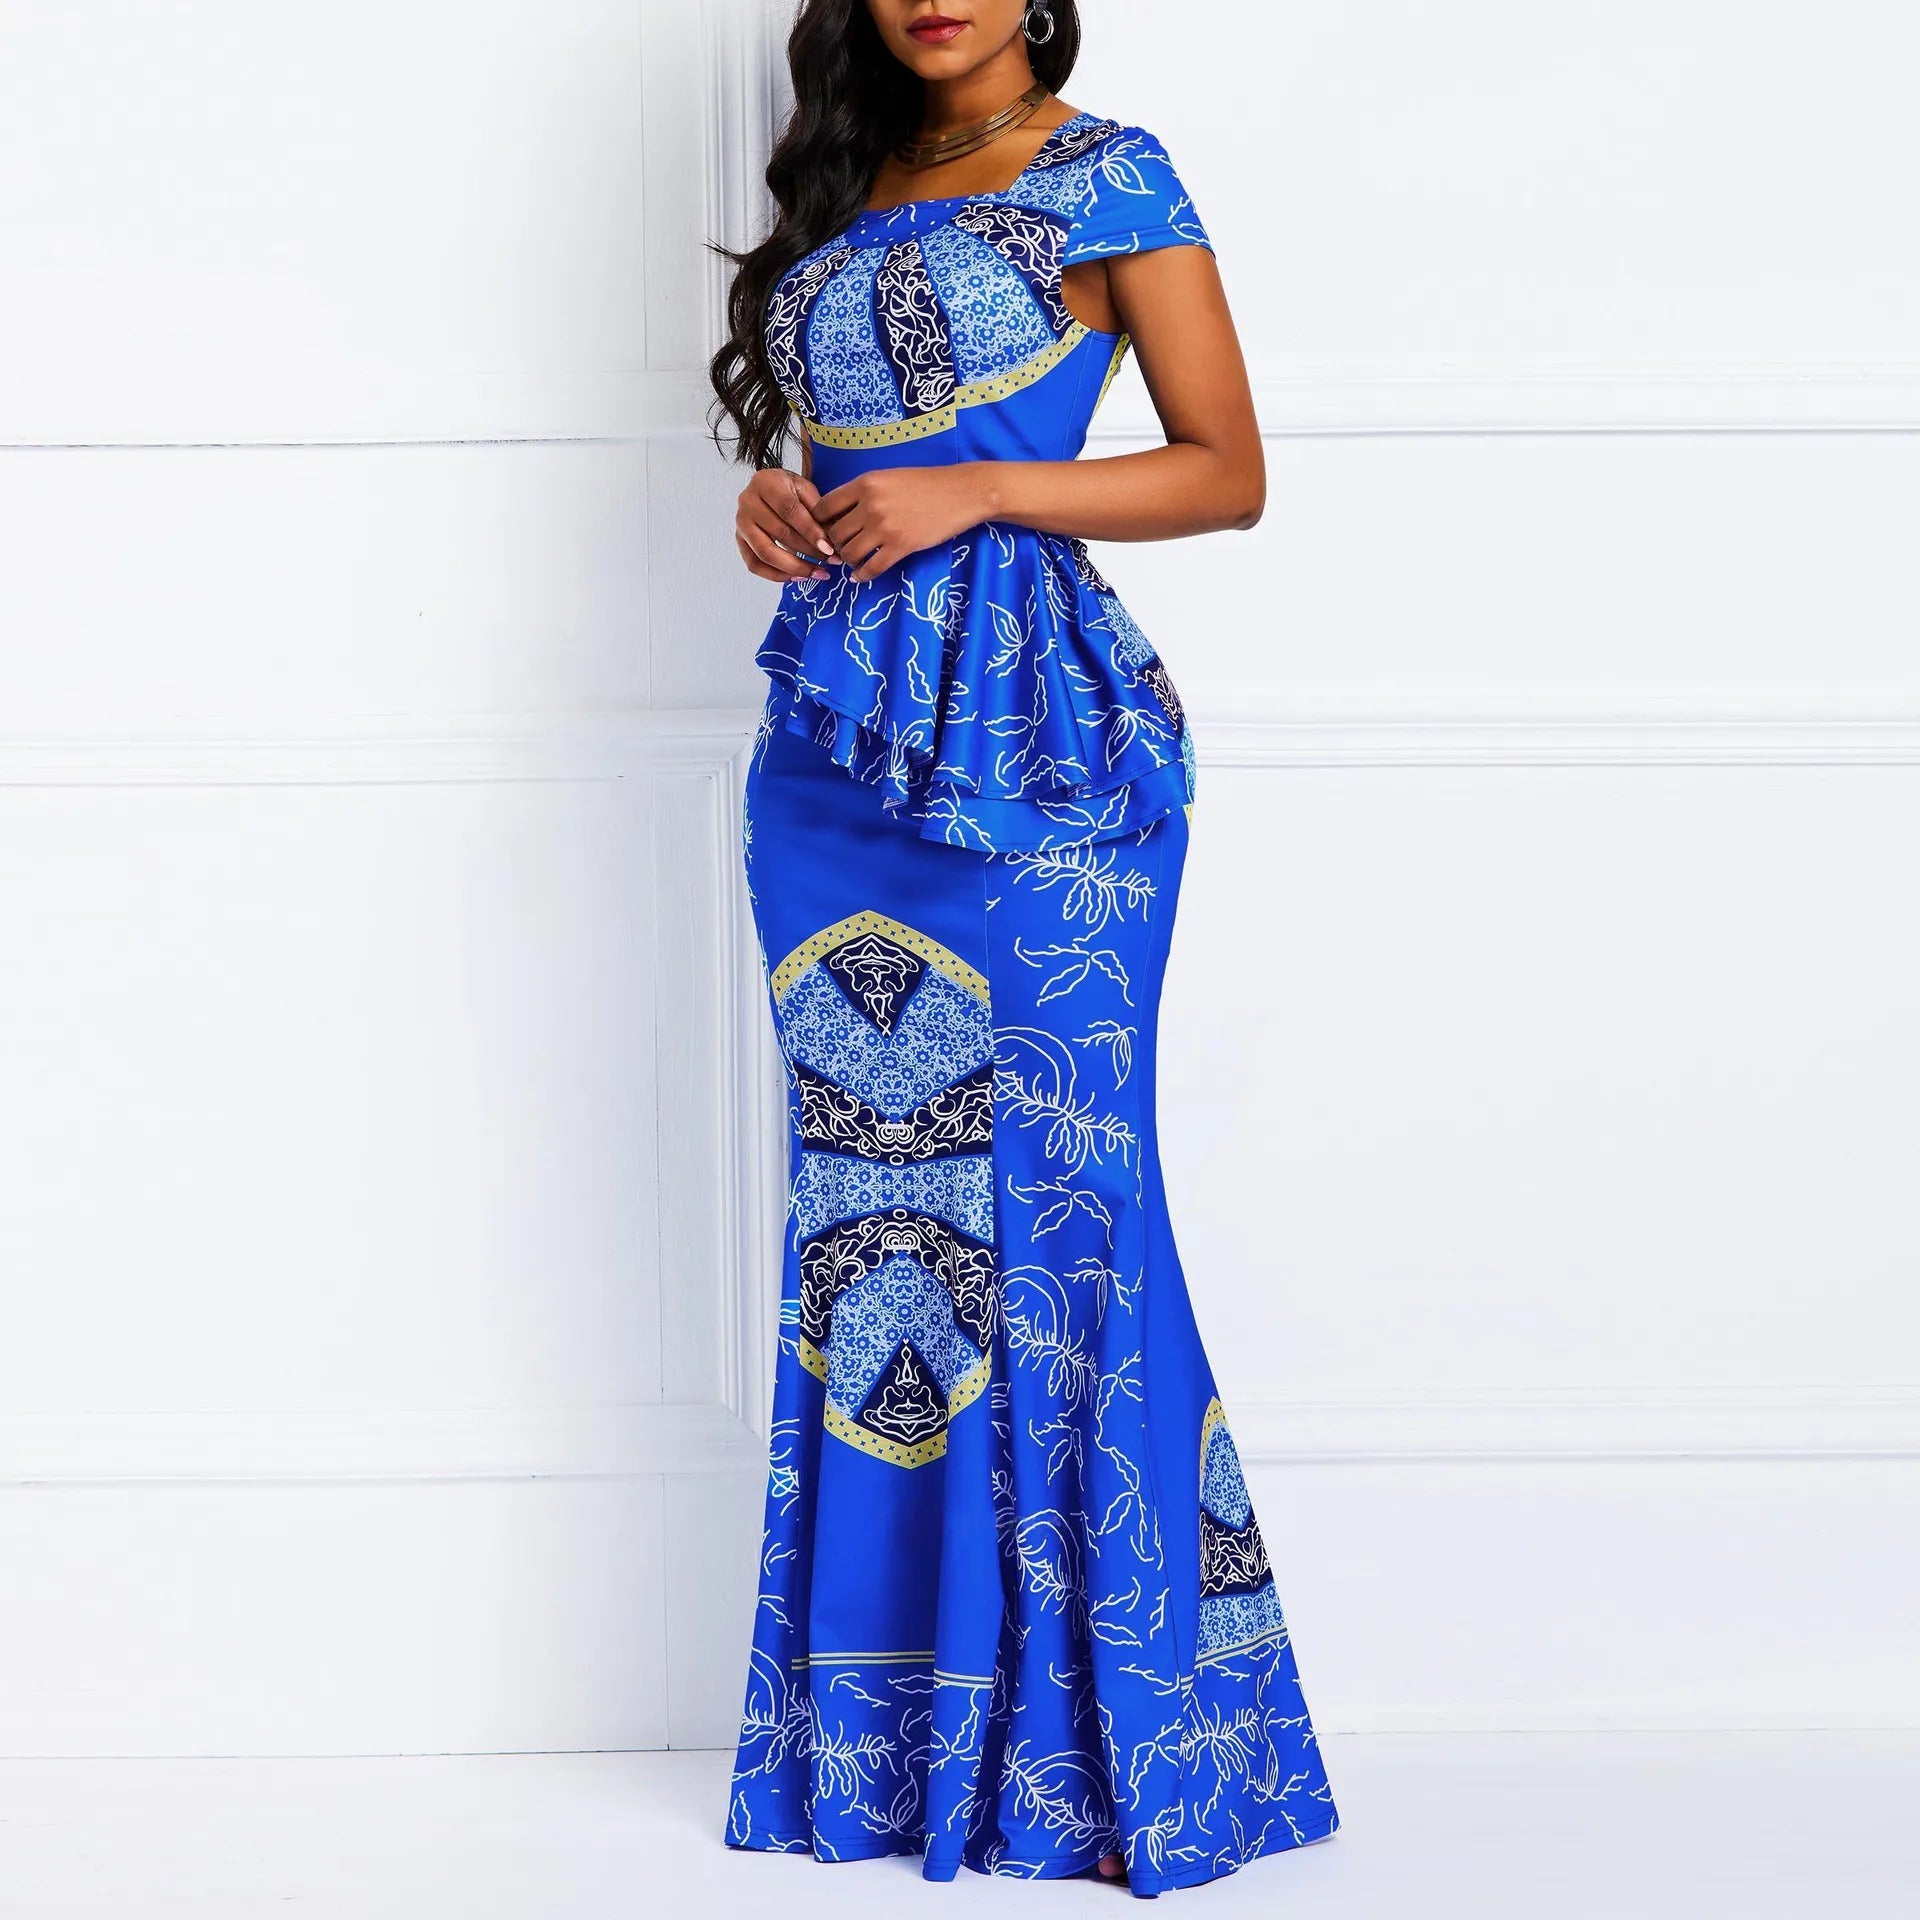 Elegant Plus-Size Ankara Party Dresses: Square Neck Ruffle Skirt and Fashion-Forward African Print Robe - Flexi Africa - Flexi Africa offers Free Delivery Worldwide - Vibrant African traditional clothing showcasing bold prints and intricate designs